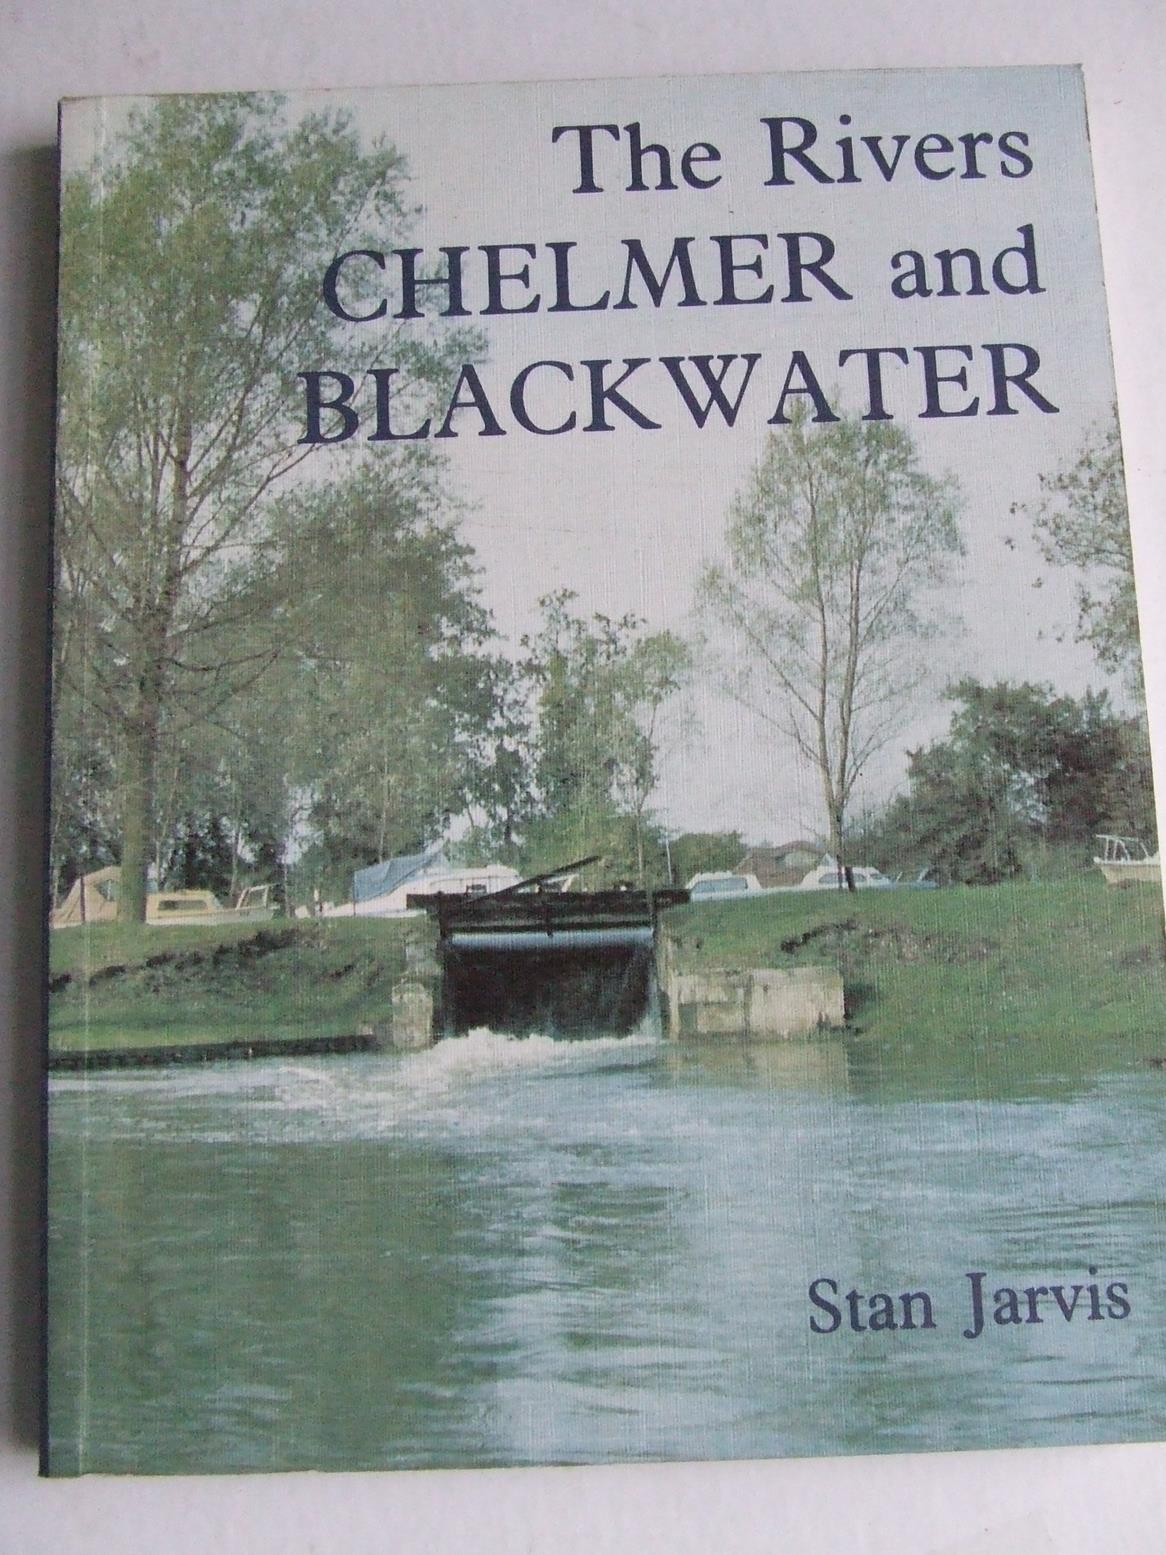 The Rivers Chelmer and Blackwater